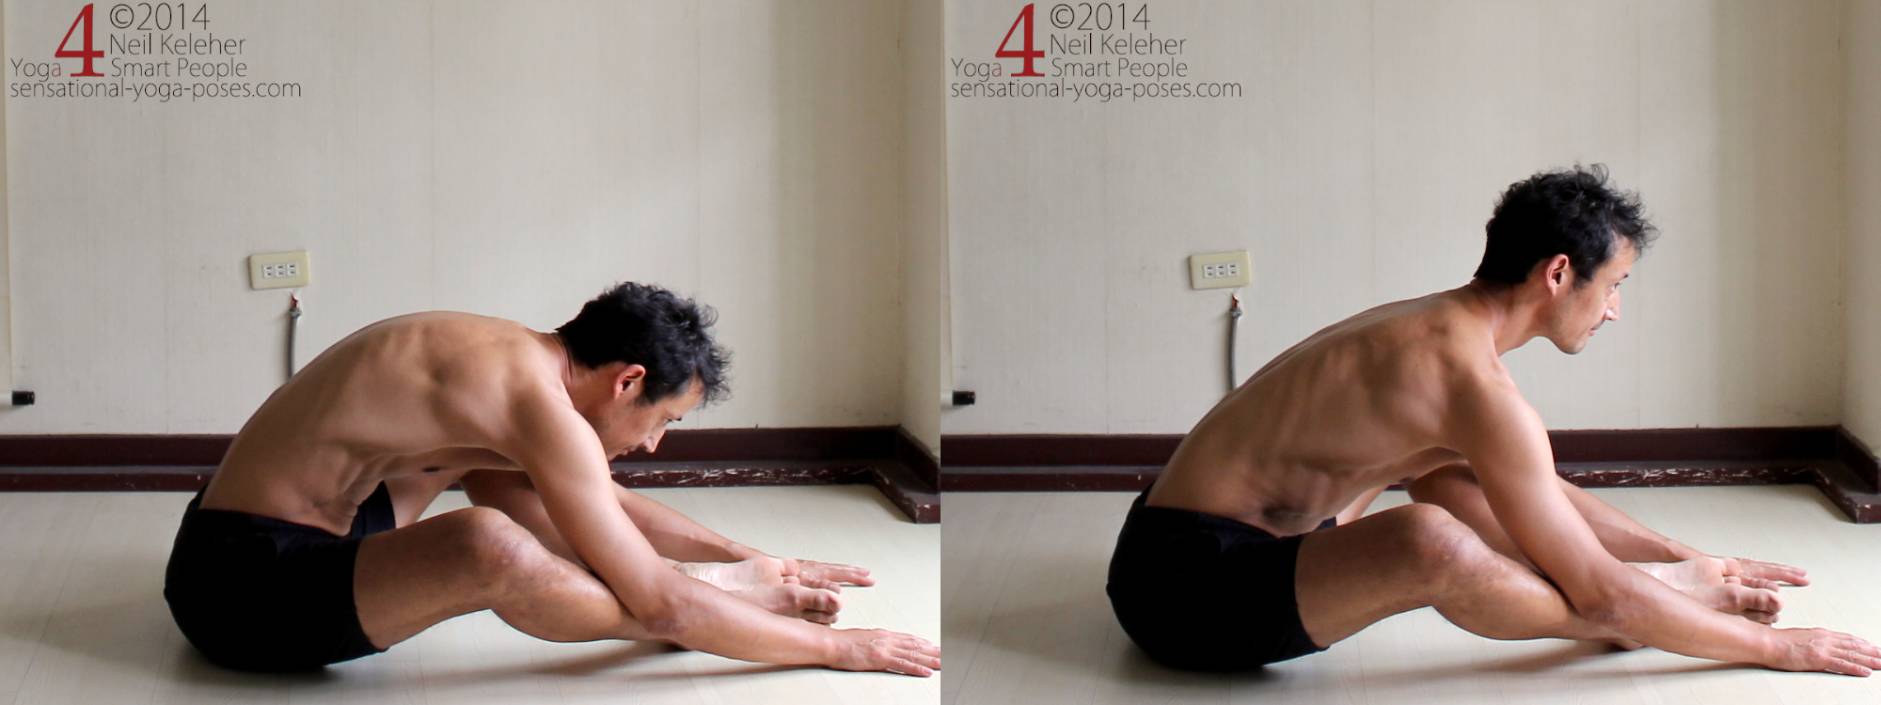 Open chest and look forwards. (Straighten thoracic spine).